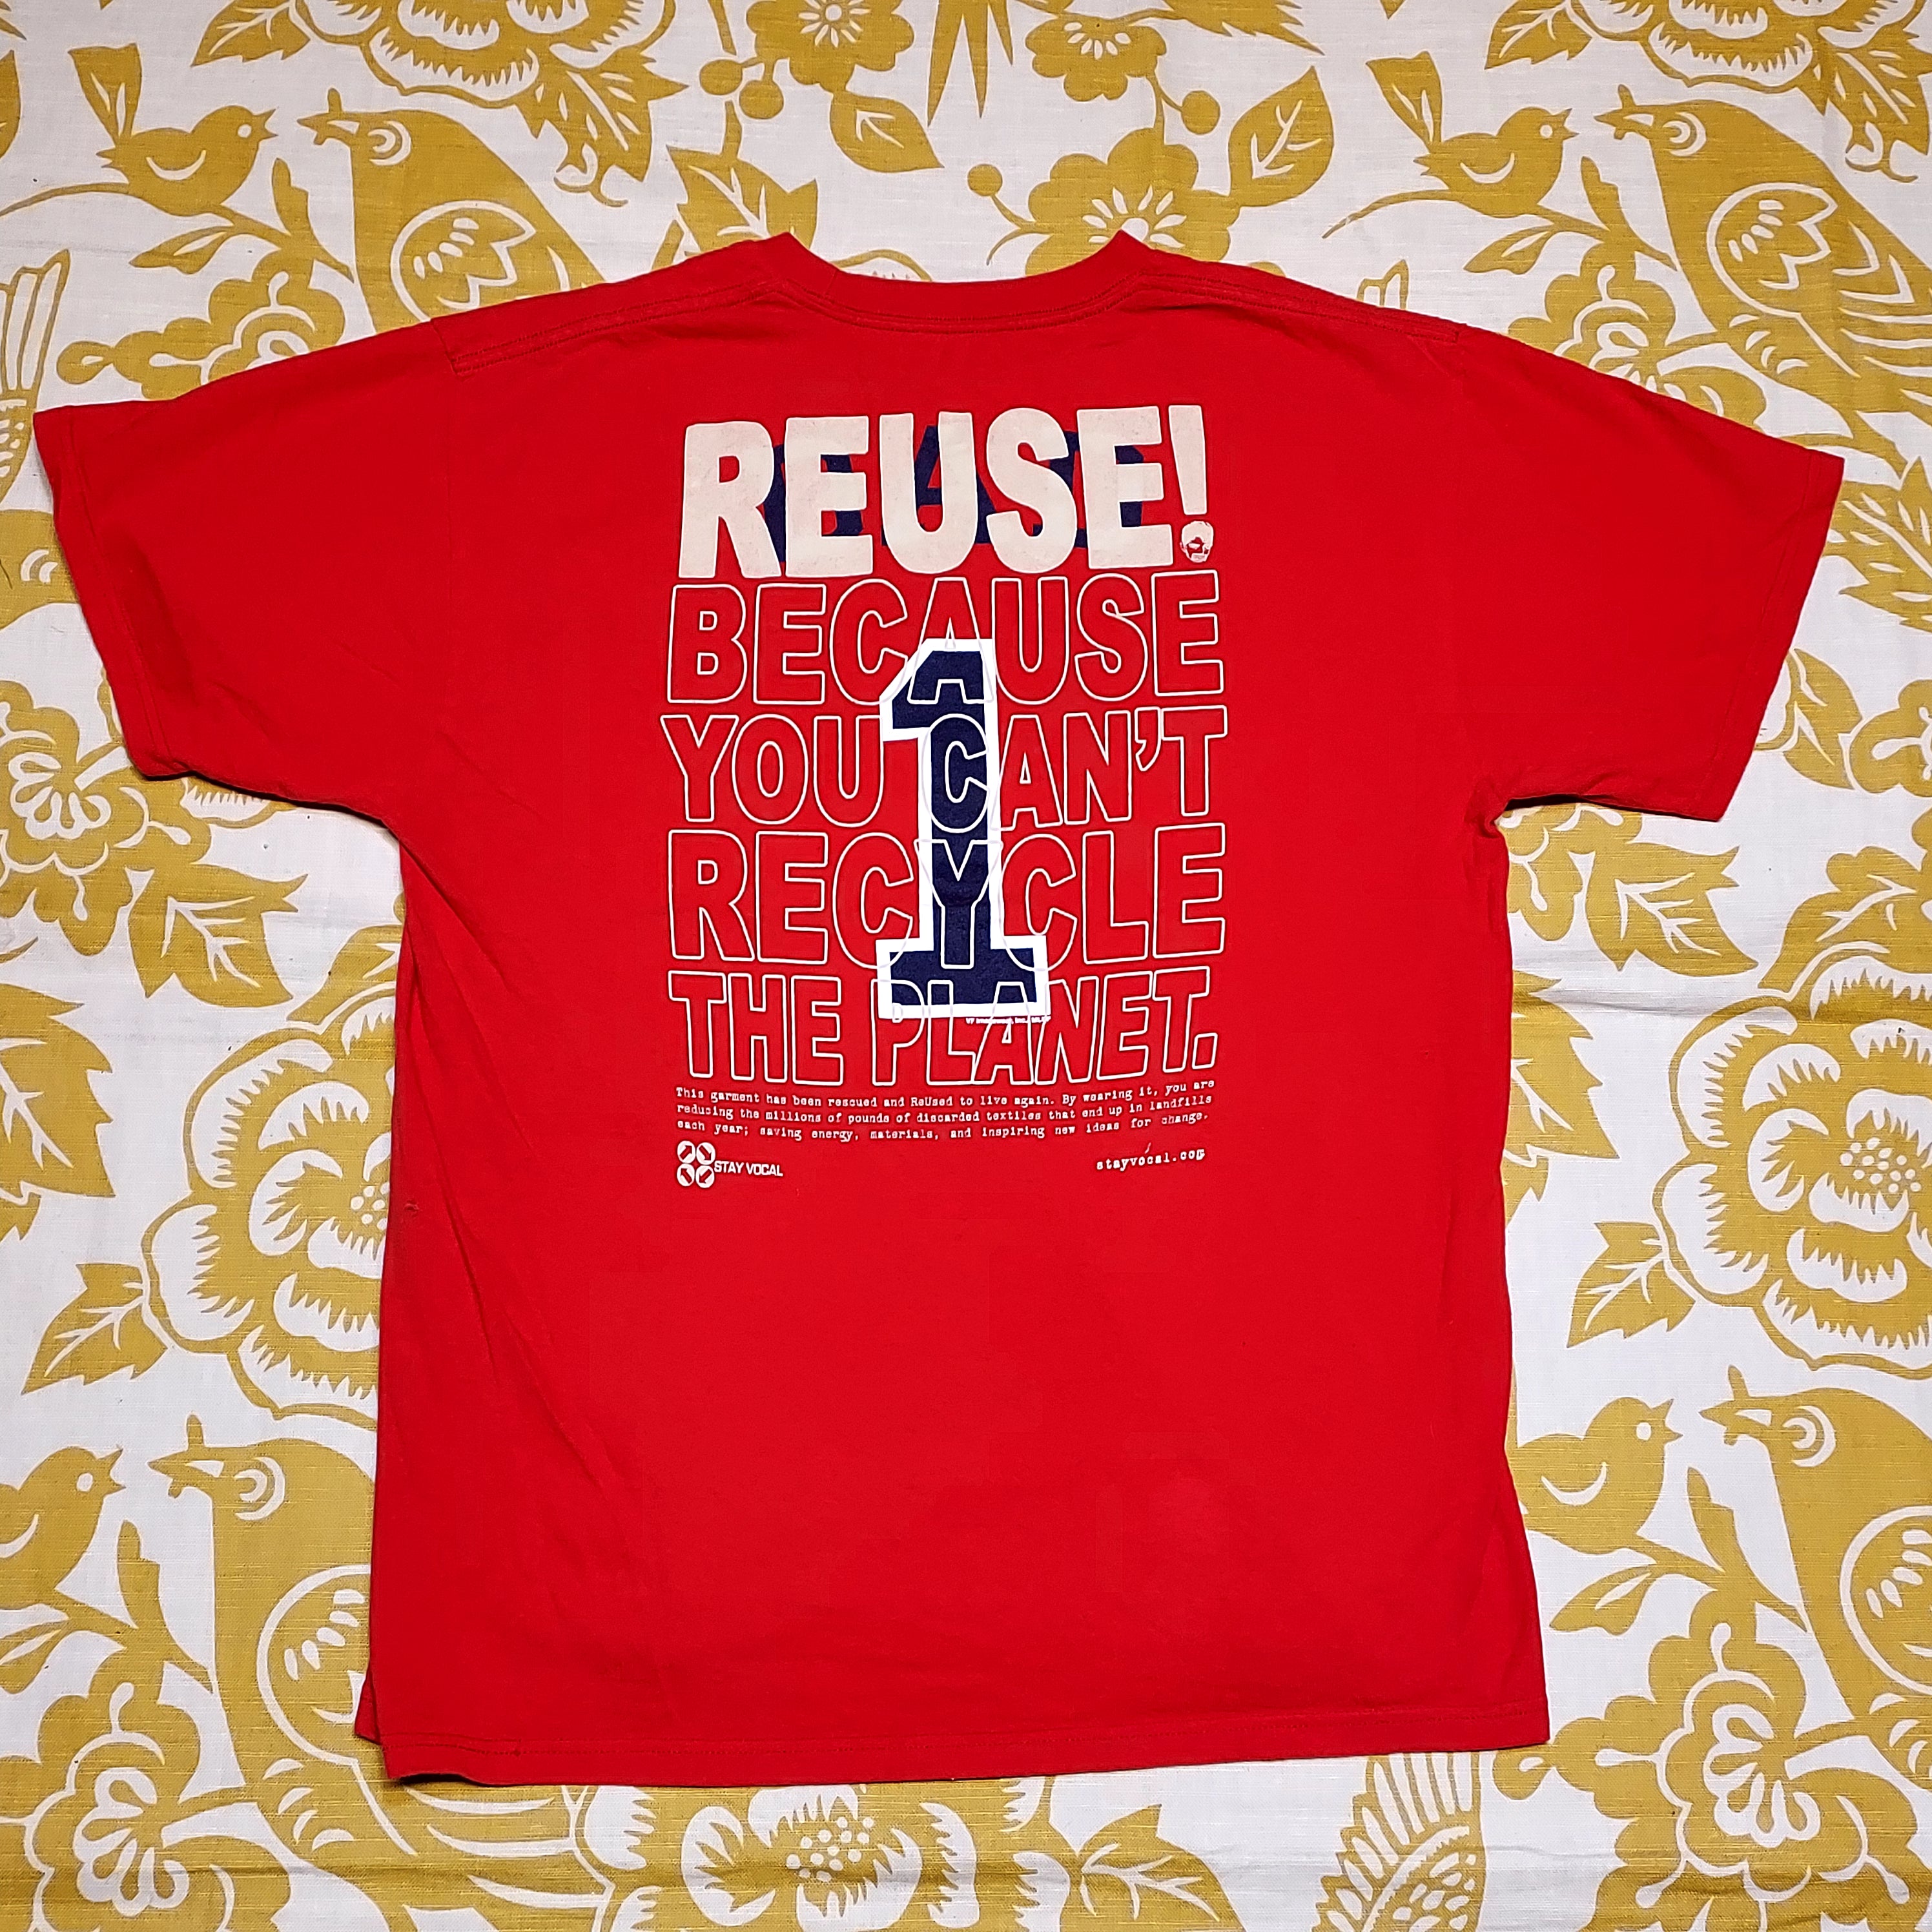 One of a Kind (Men's L) REUSE! Red Sox #1 T-Shirt